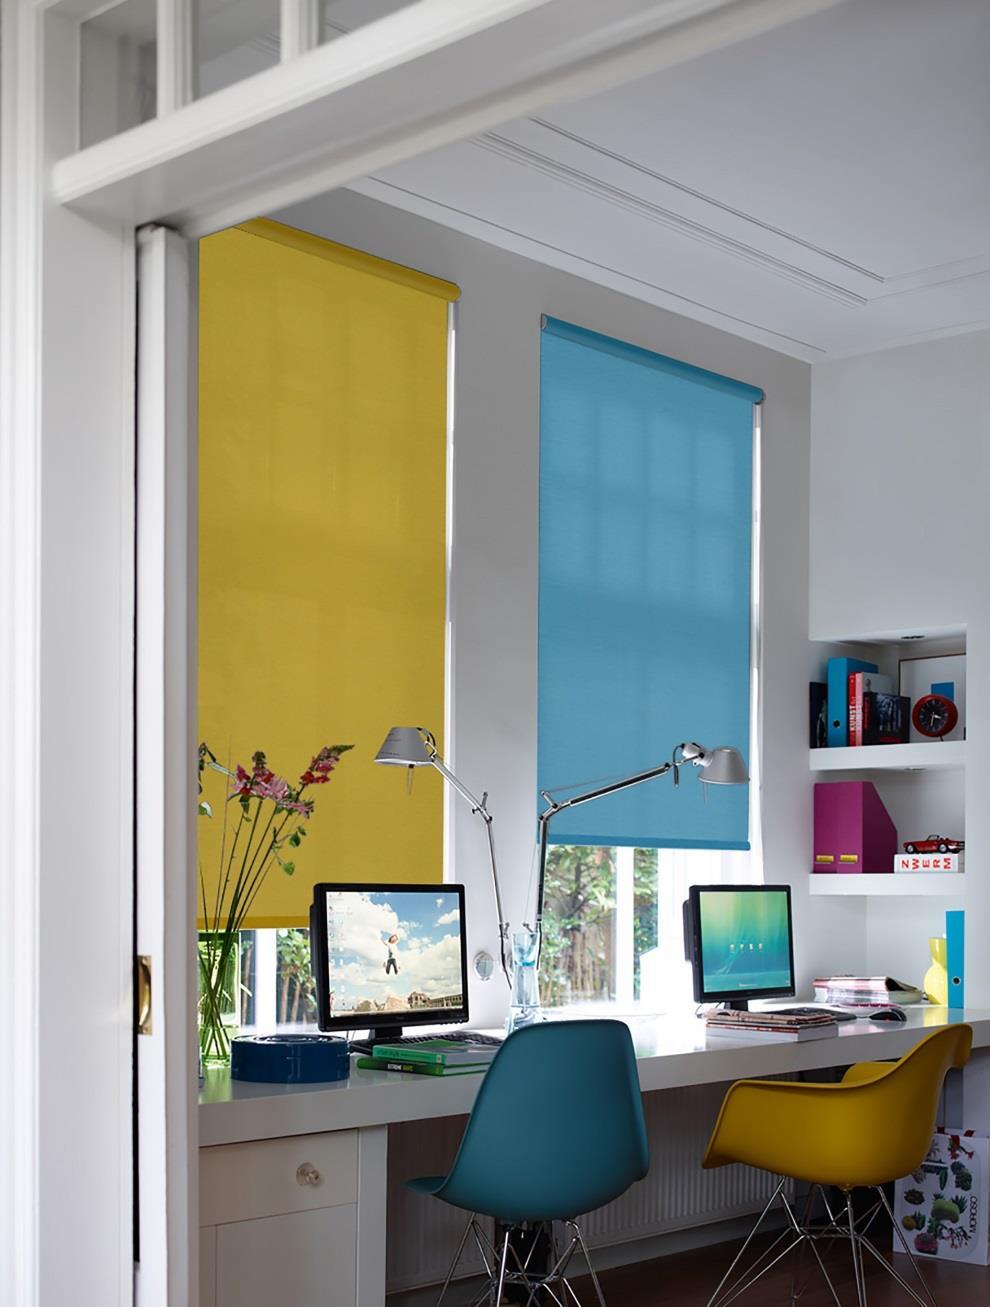 Roller Blinds The simplicity of the Roller blind makes it one of the most versatile choices of blind, suitable for any room in the house.